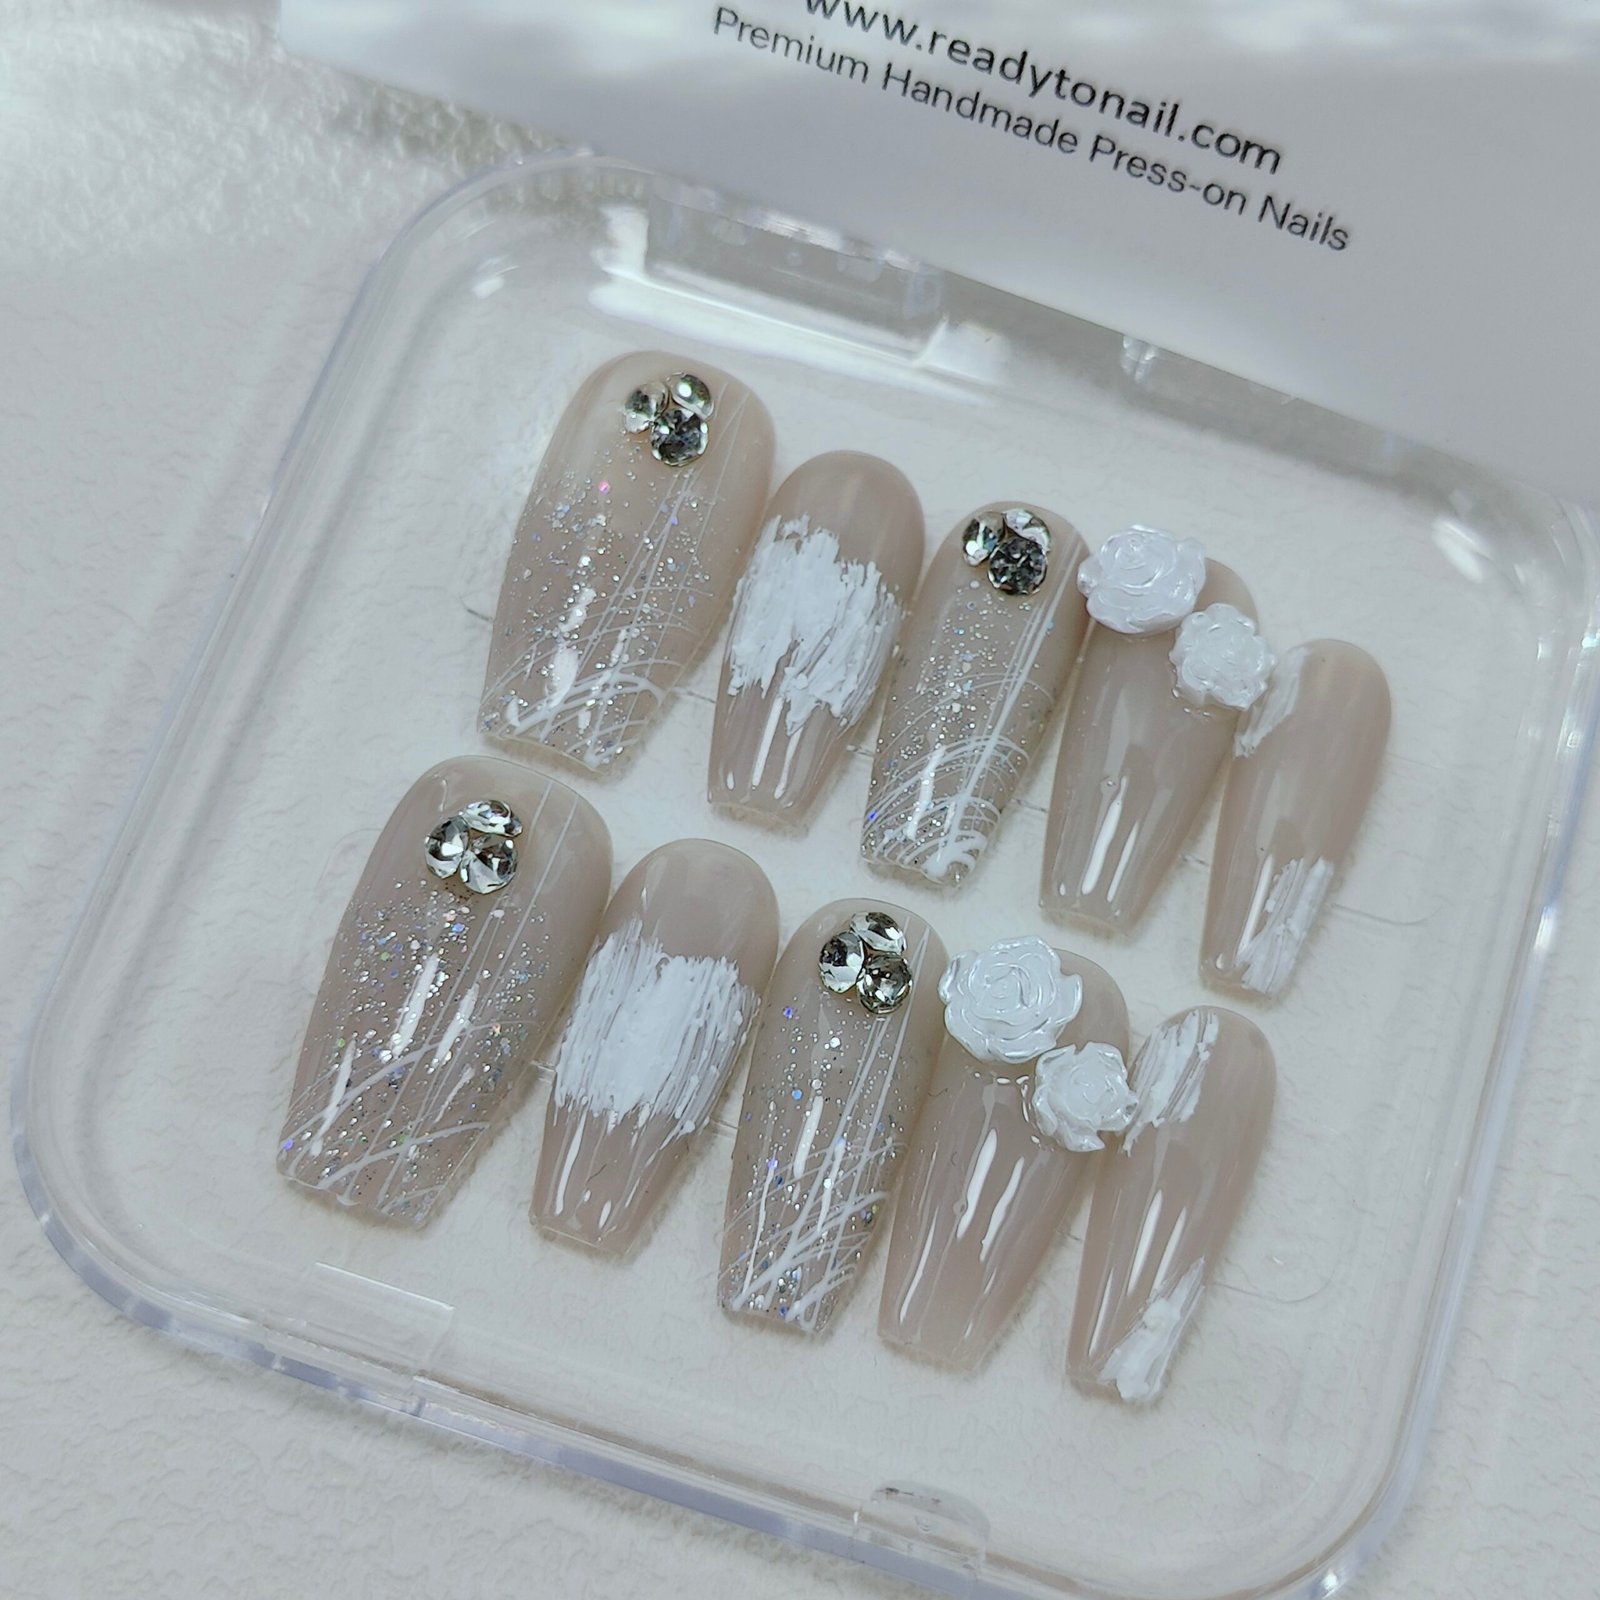 Grey Silver Glitter nails Handmade with Camellia Charms Glamor Nail extensions